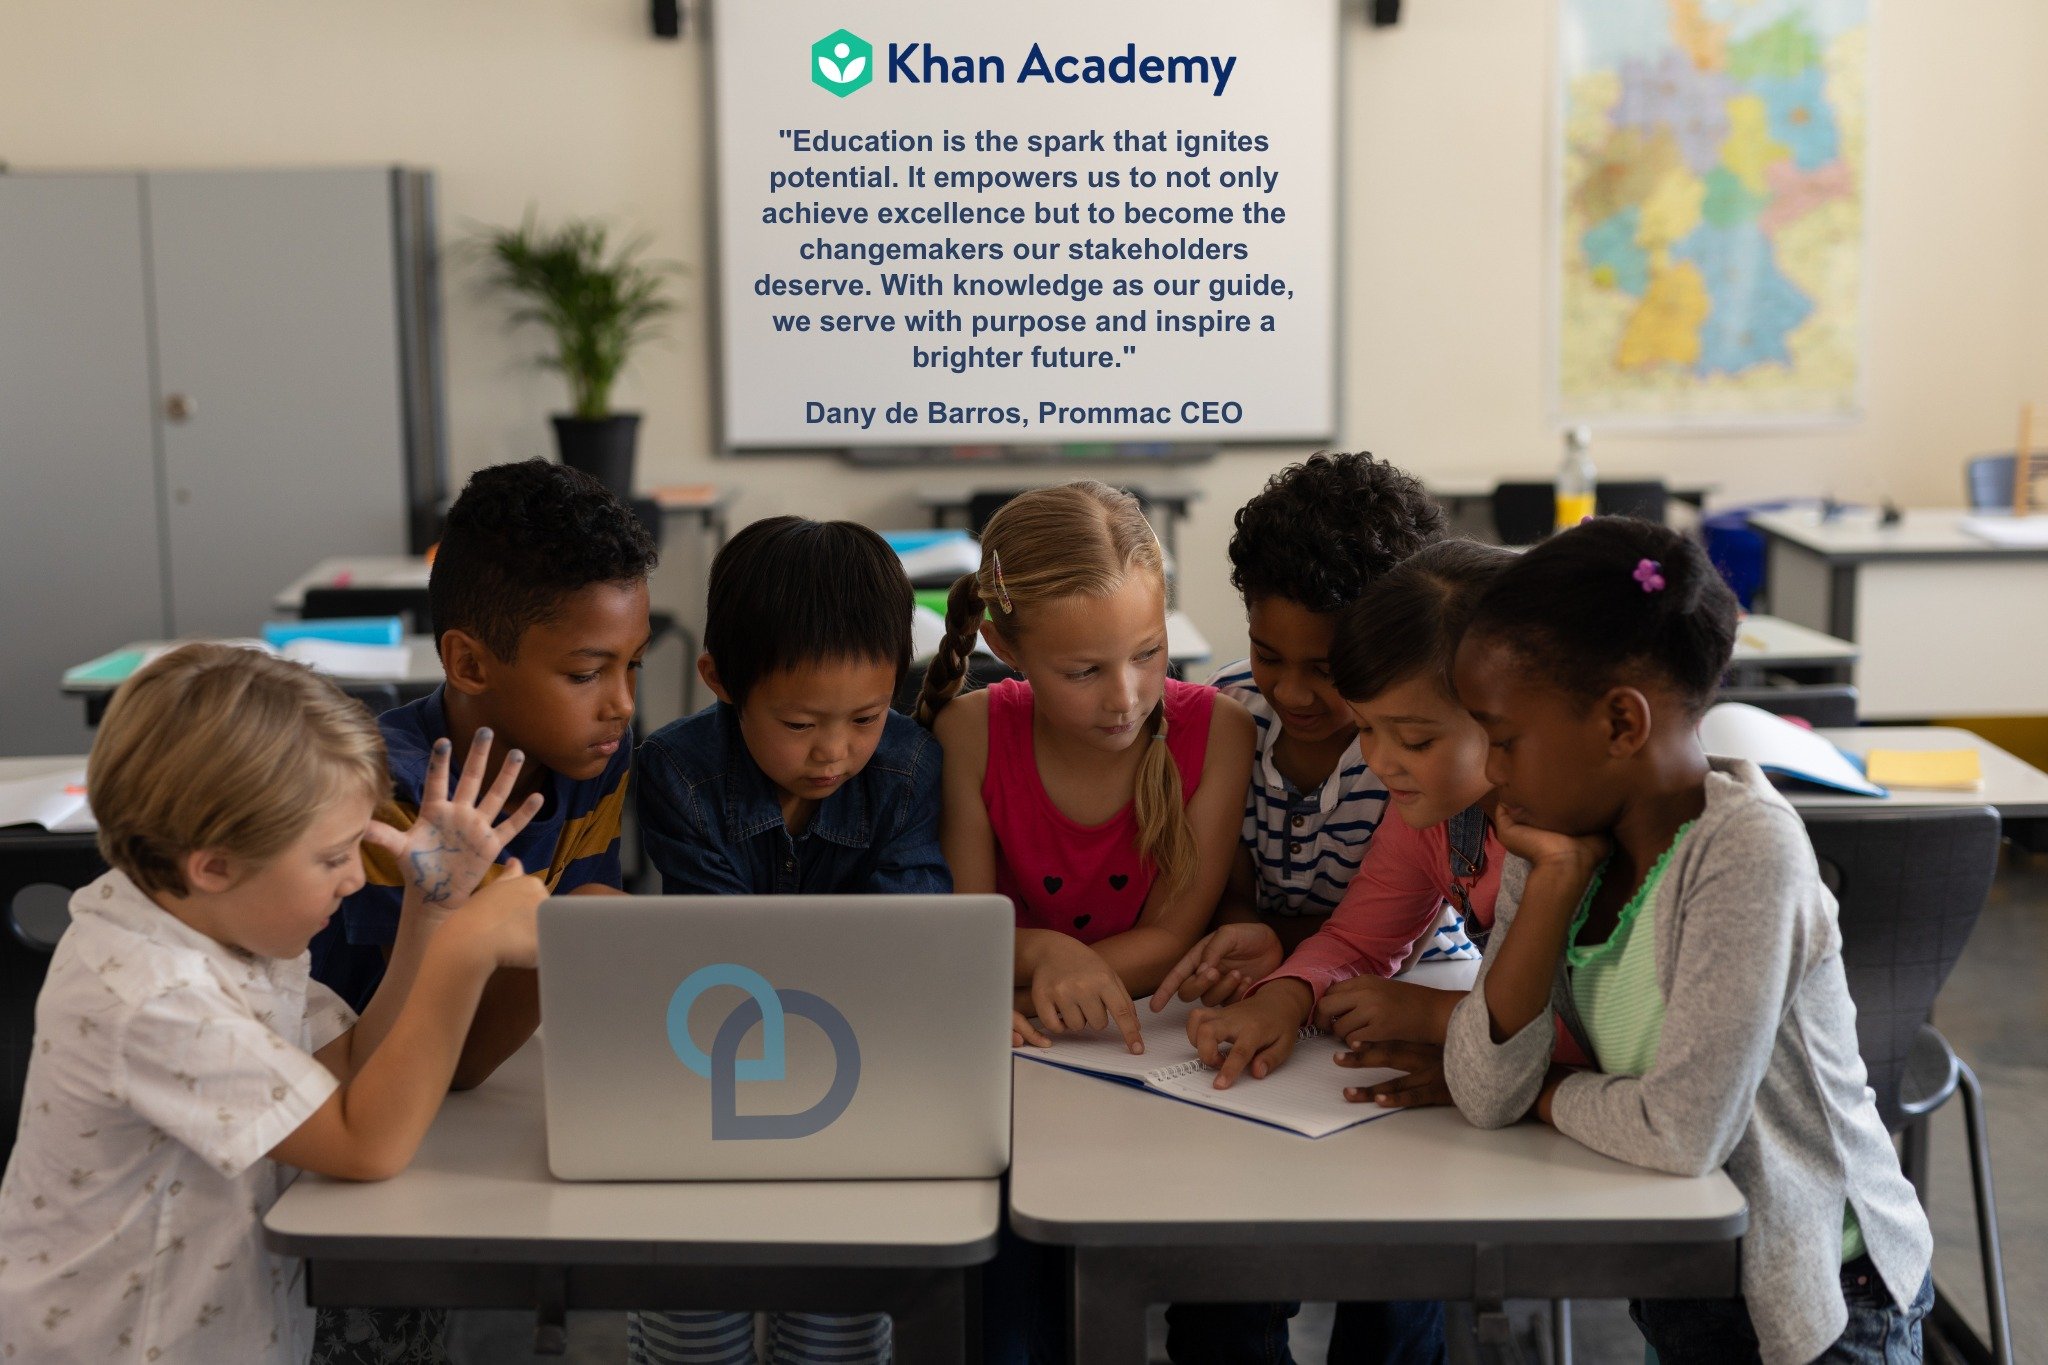 Khan Academy is revolutionizing education, making high-quality learning resources accessible to everyone, everywhere. Their innovative approach has empowered millions of learners around the world, transforming lives with the power of knowledge.

Thro